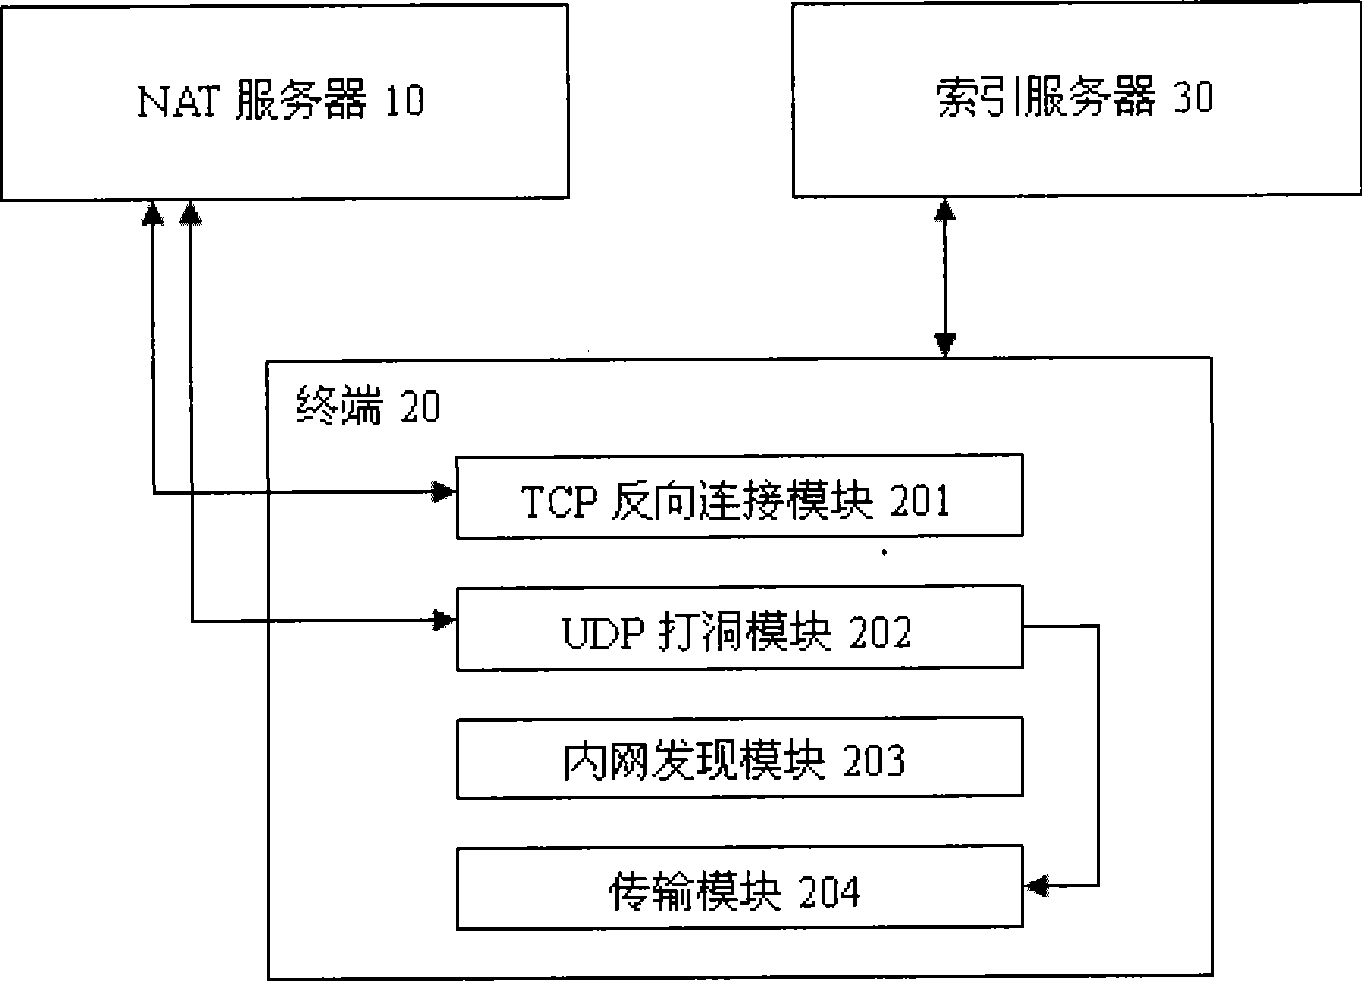 Method and system for implementing NAT penetration in P2P network